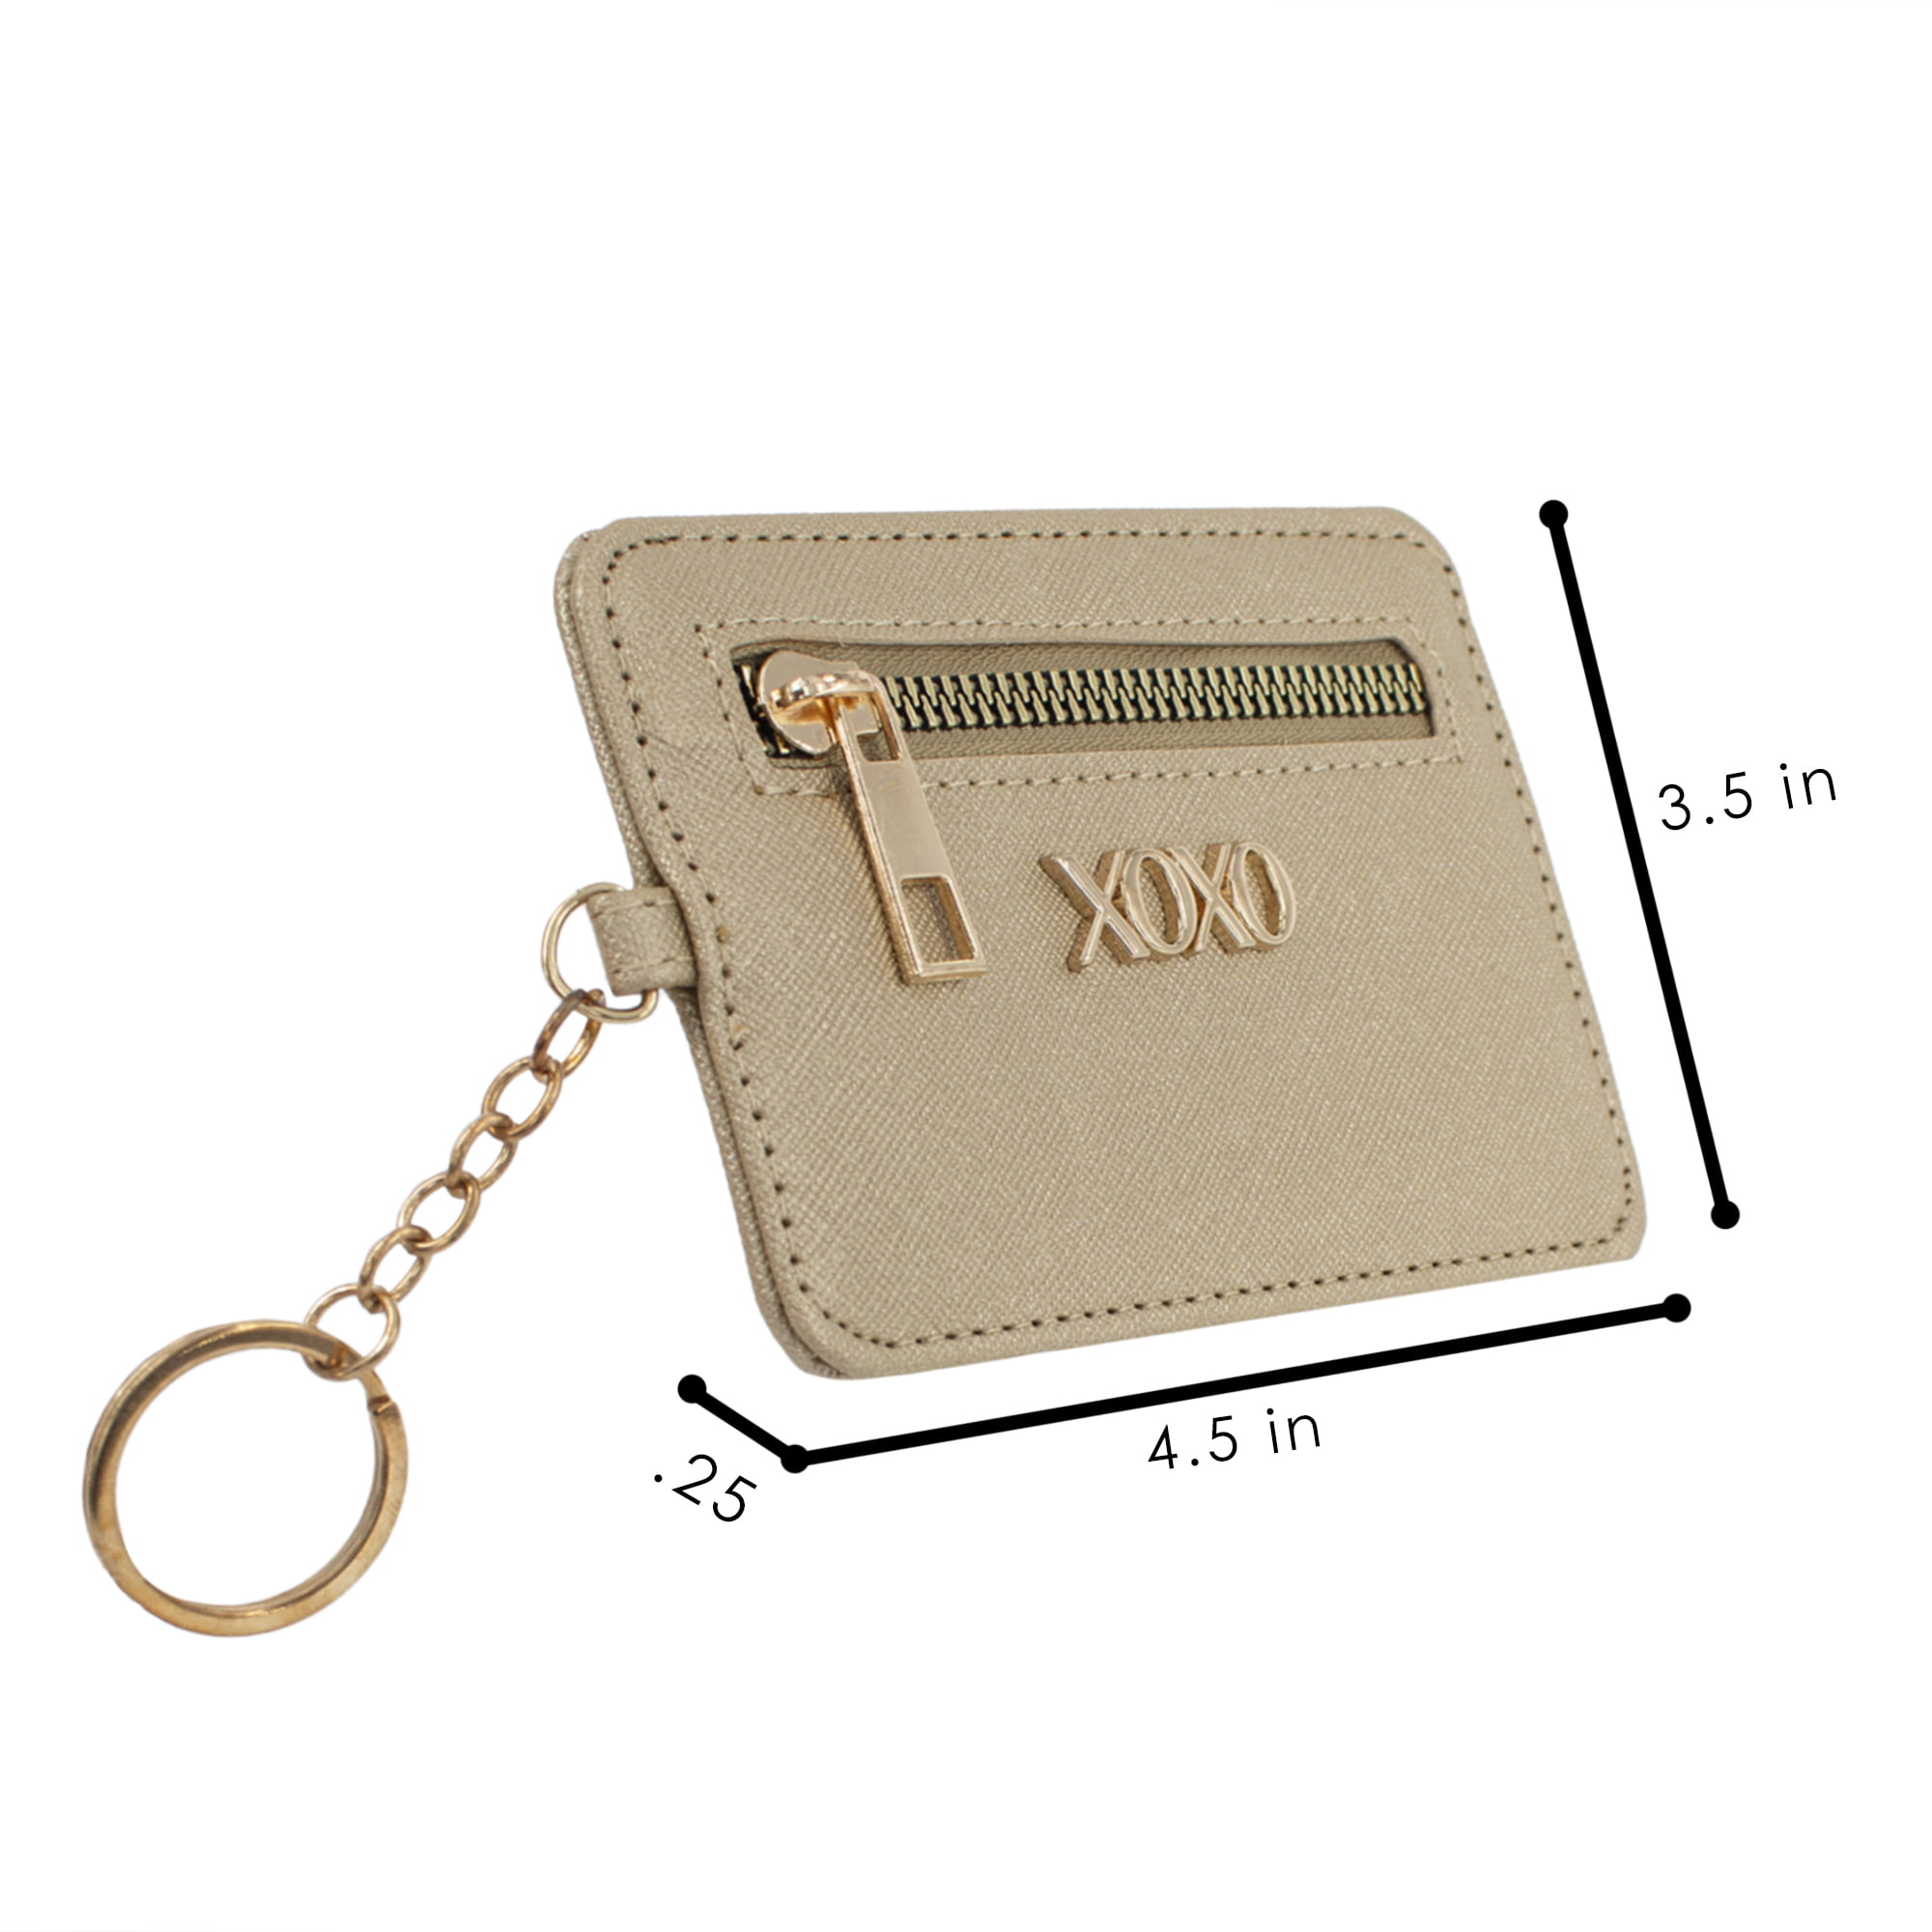 XOXO Women's Large Metallic White Saffiano Multifunction Solid / Patterned  Coin Case Wallet 